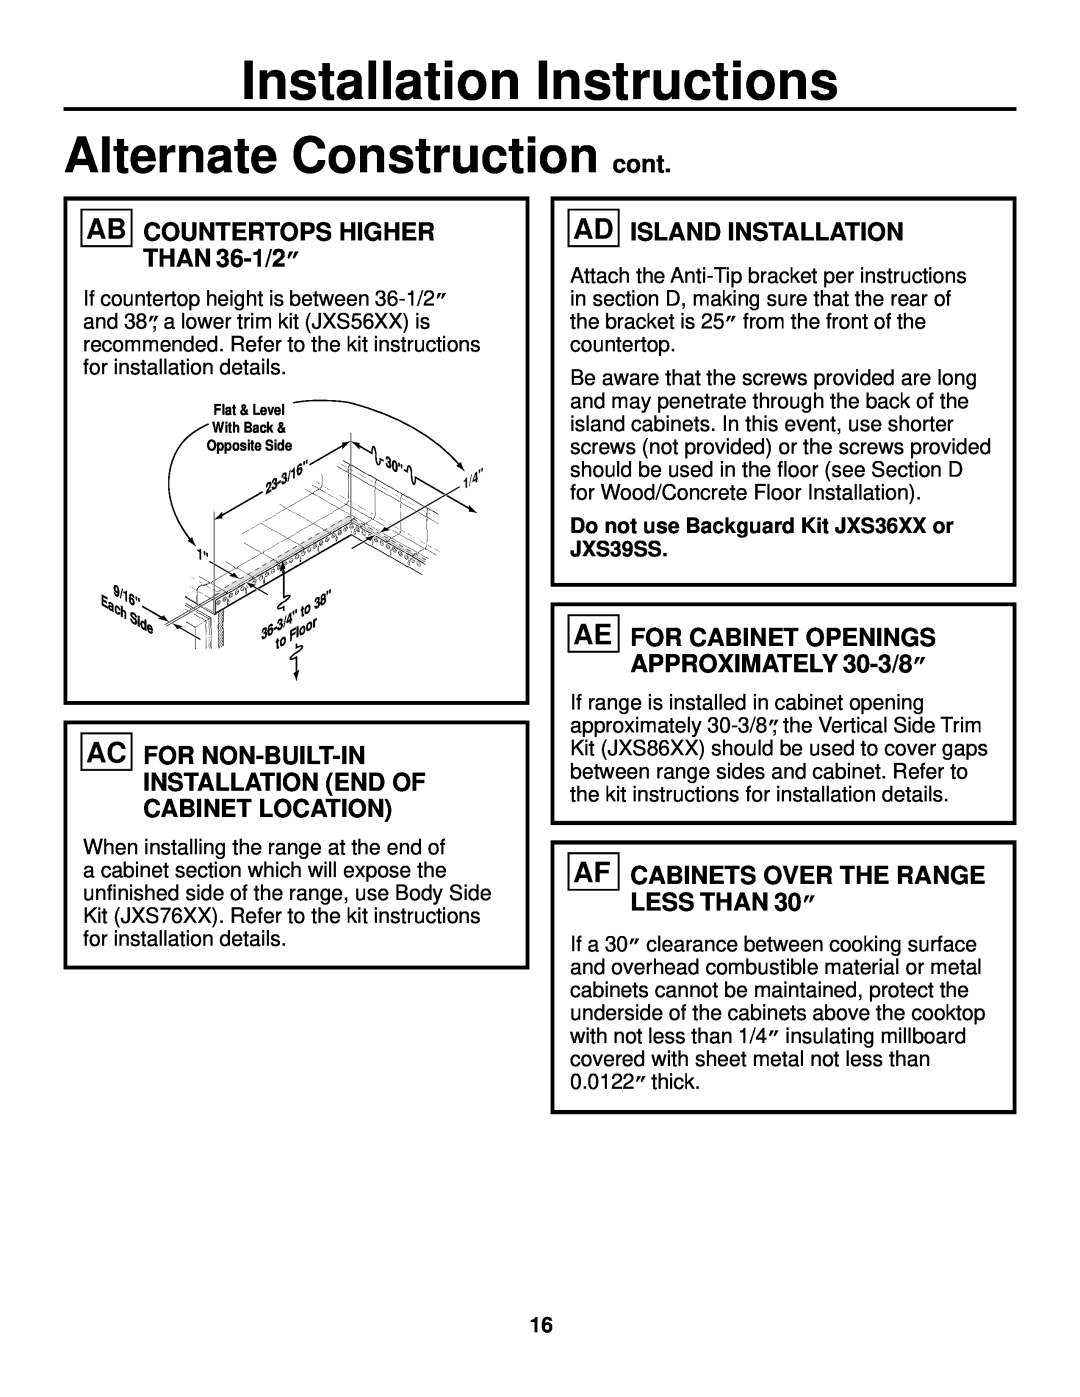 GE JS905 installation instructions Alternate Construction cont, AB COUNTERTOPS HIGHER THAN 36-1/2”, Ad Island Installation 